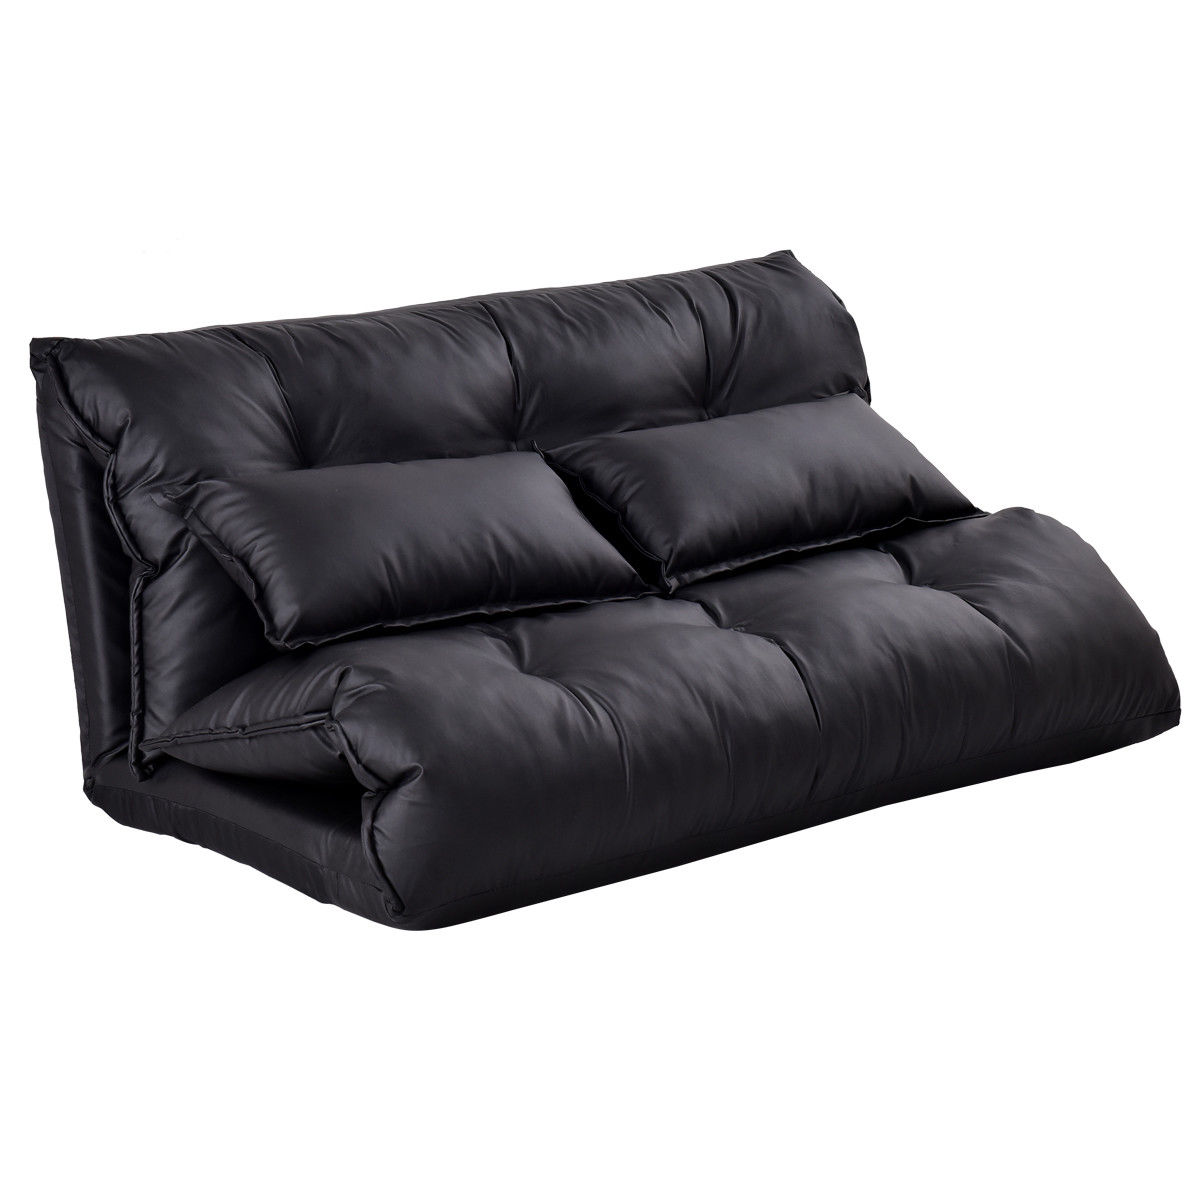 Costway PU Leather Foldable Modern Leisure Floor Sofa Bed Video Gaming 2 Pillows Black - image 4 of 7